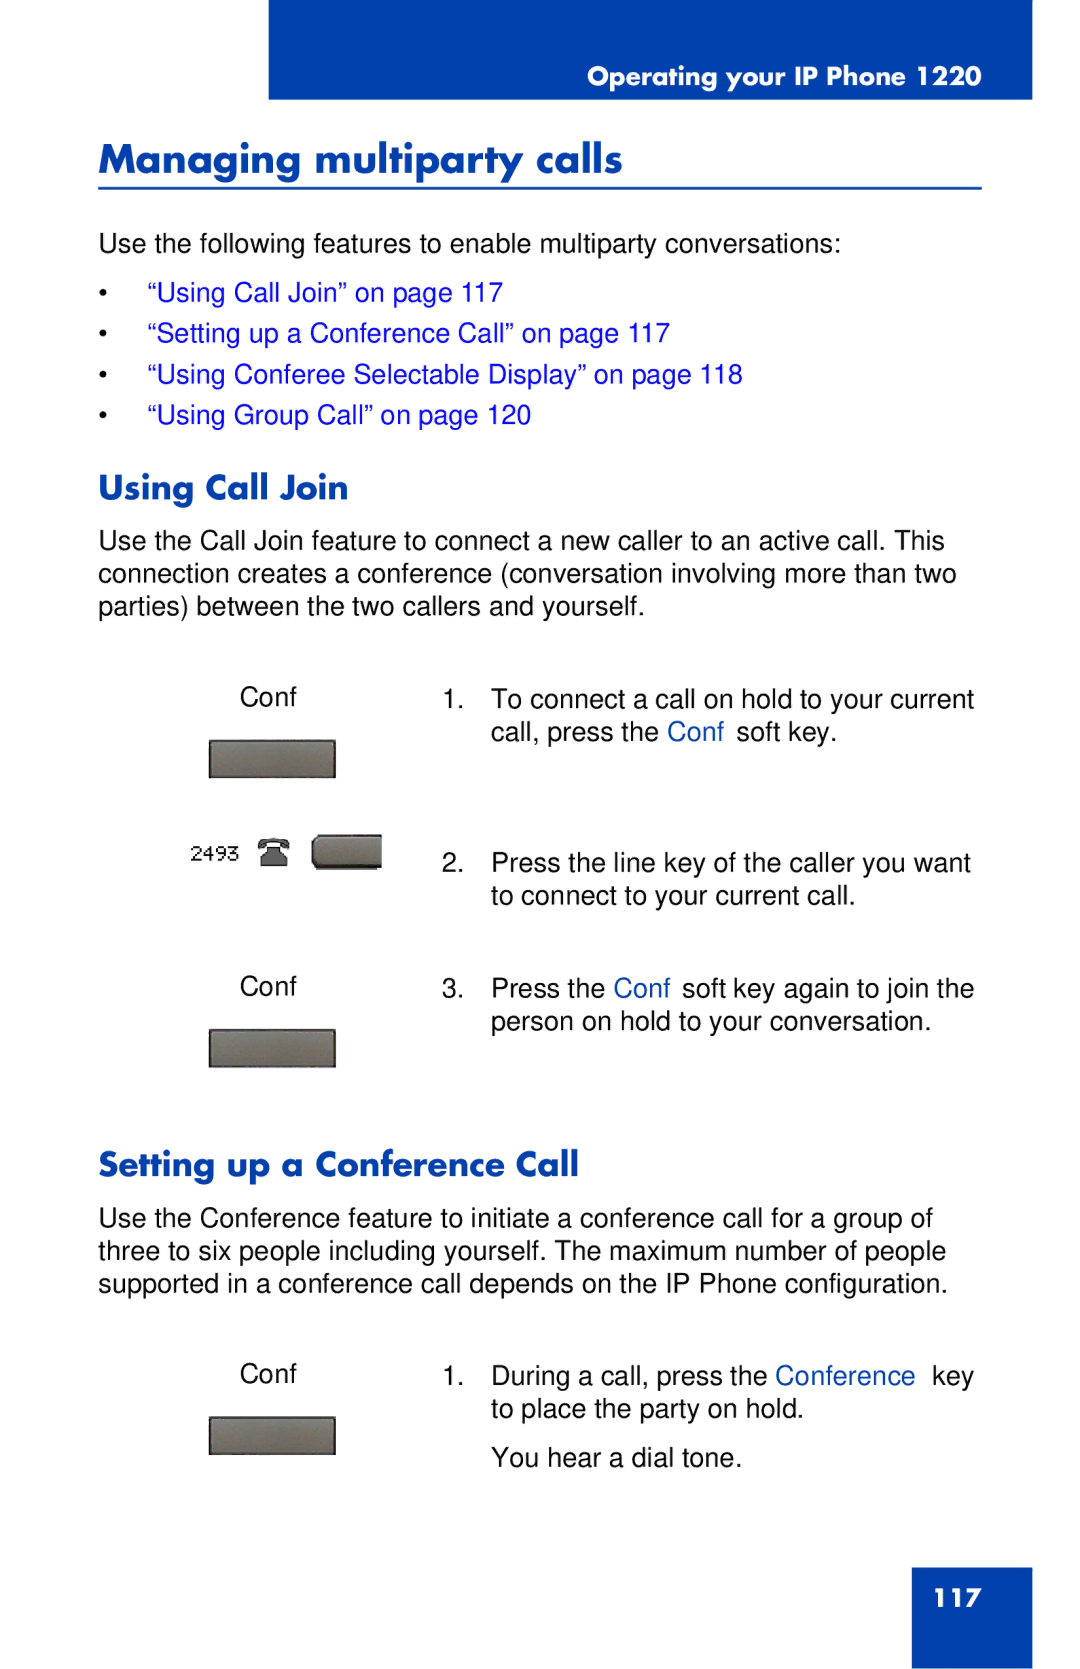 Nortel Networks IP Phone 1220 manual Managing multiparty calls, Using Call Join, Setting up a Conference Call 